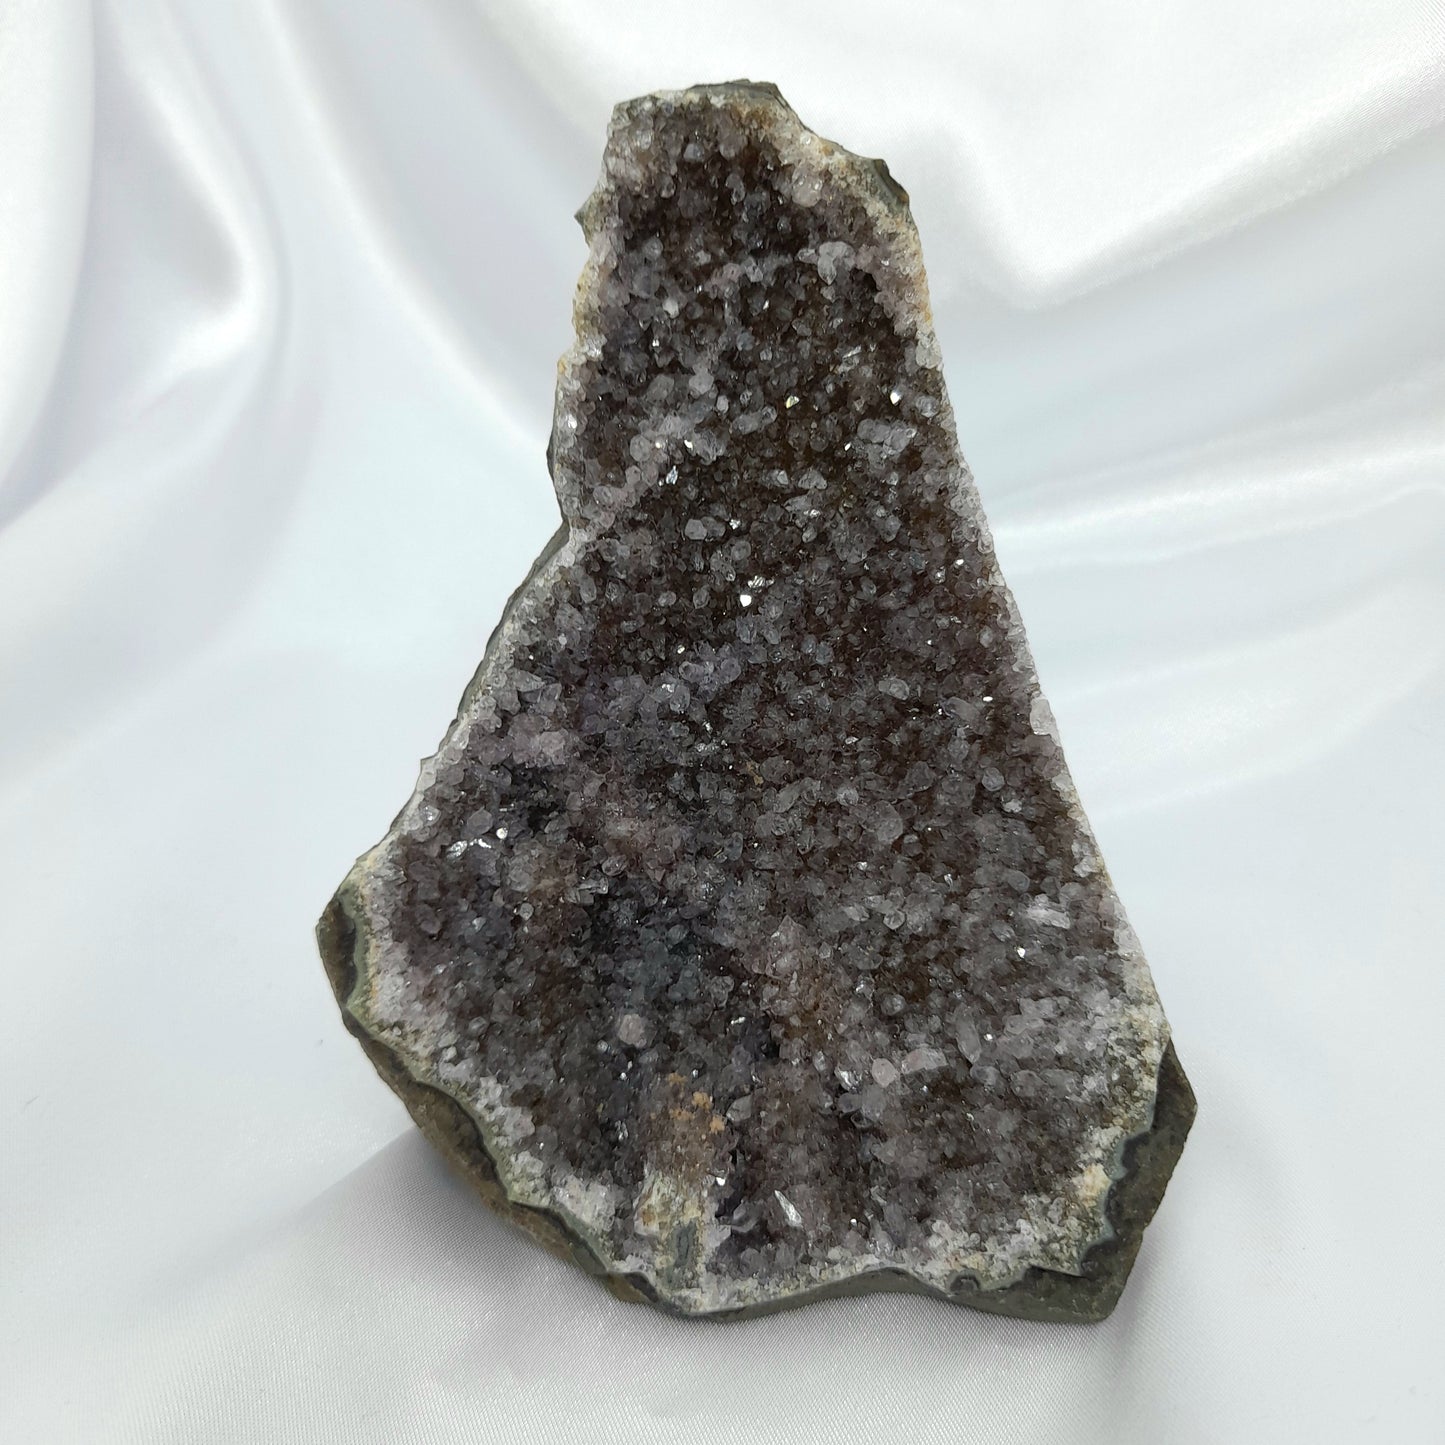 Amethyst Cave - Amethyst Cave Brown and Purple Crystal Formation, 11cm Height - Natural Elegance for Spiritual Tranquility and Home Decor Energized by Earth's Power.